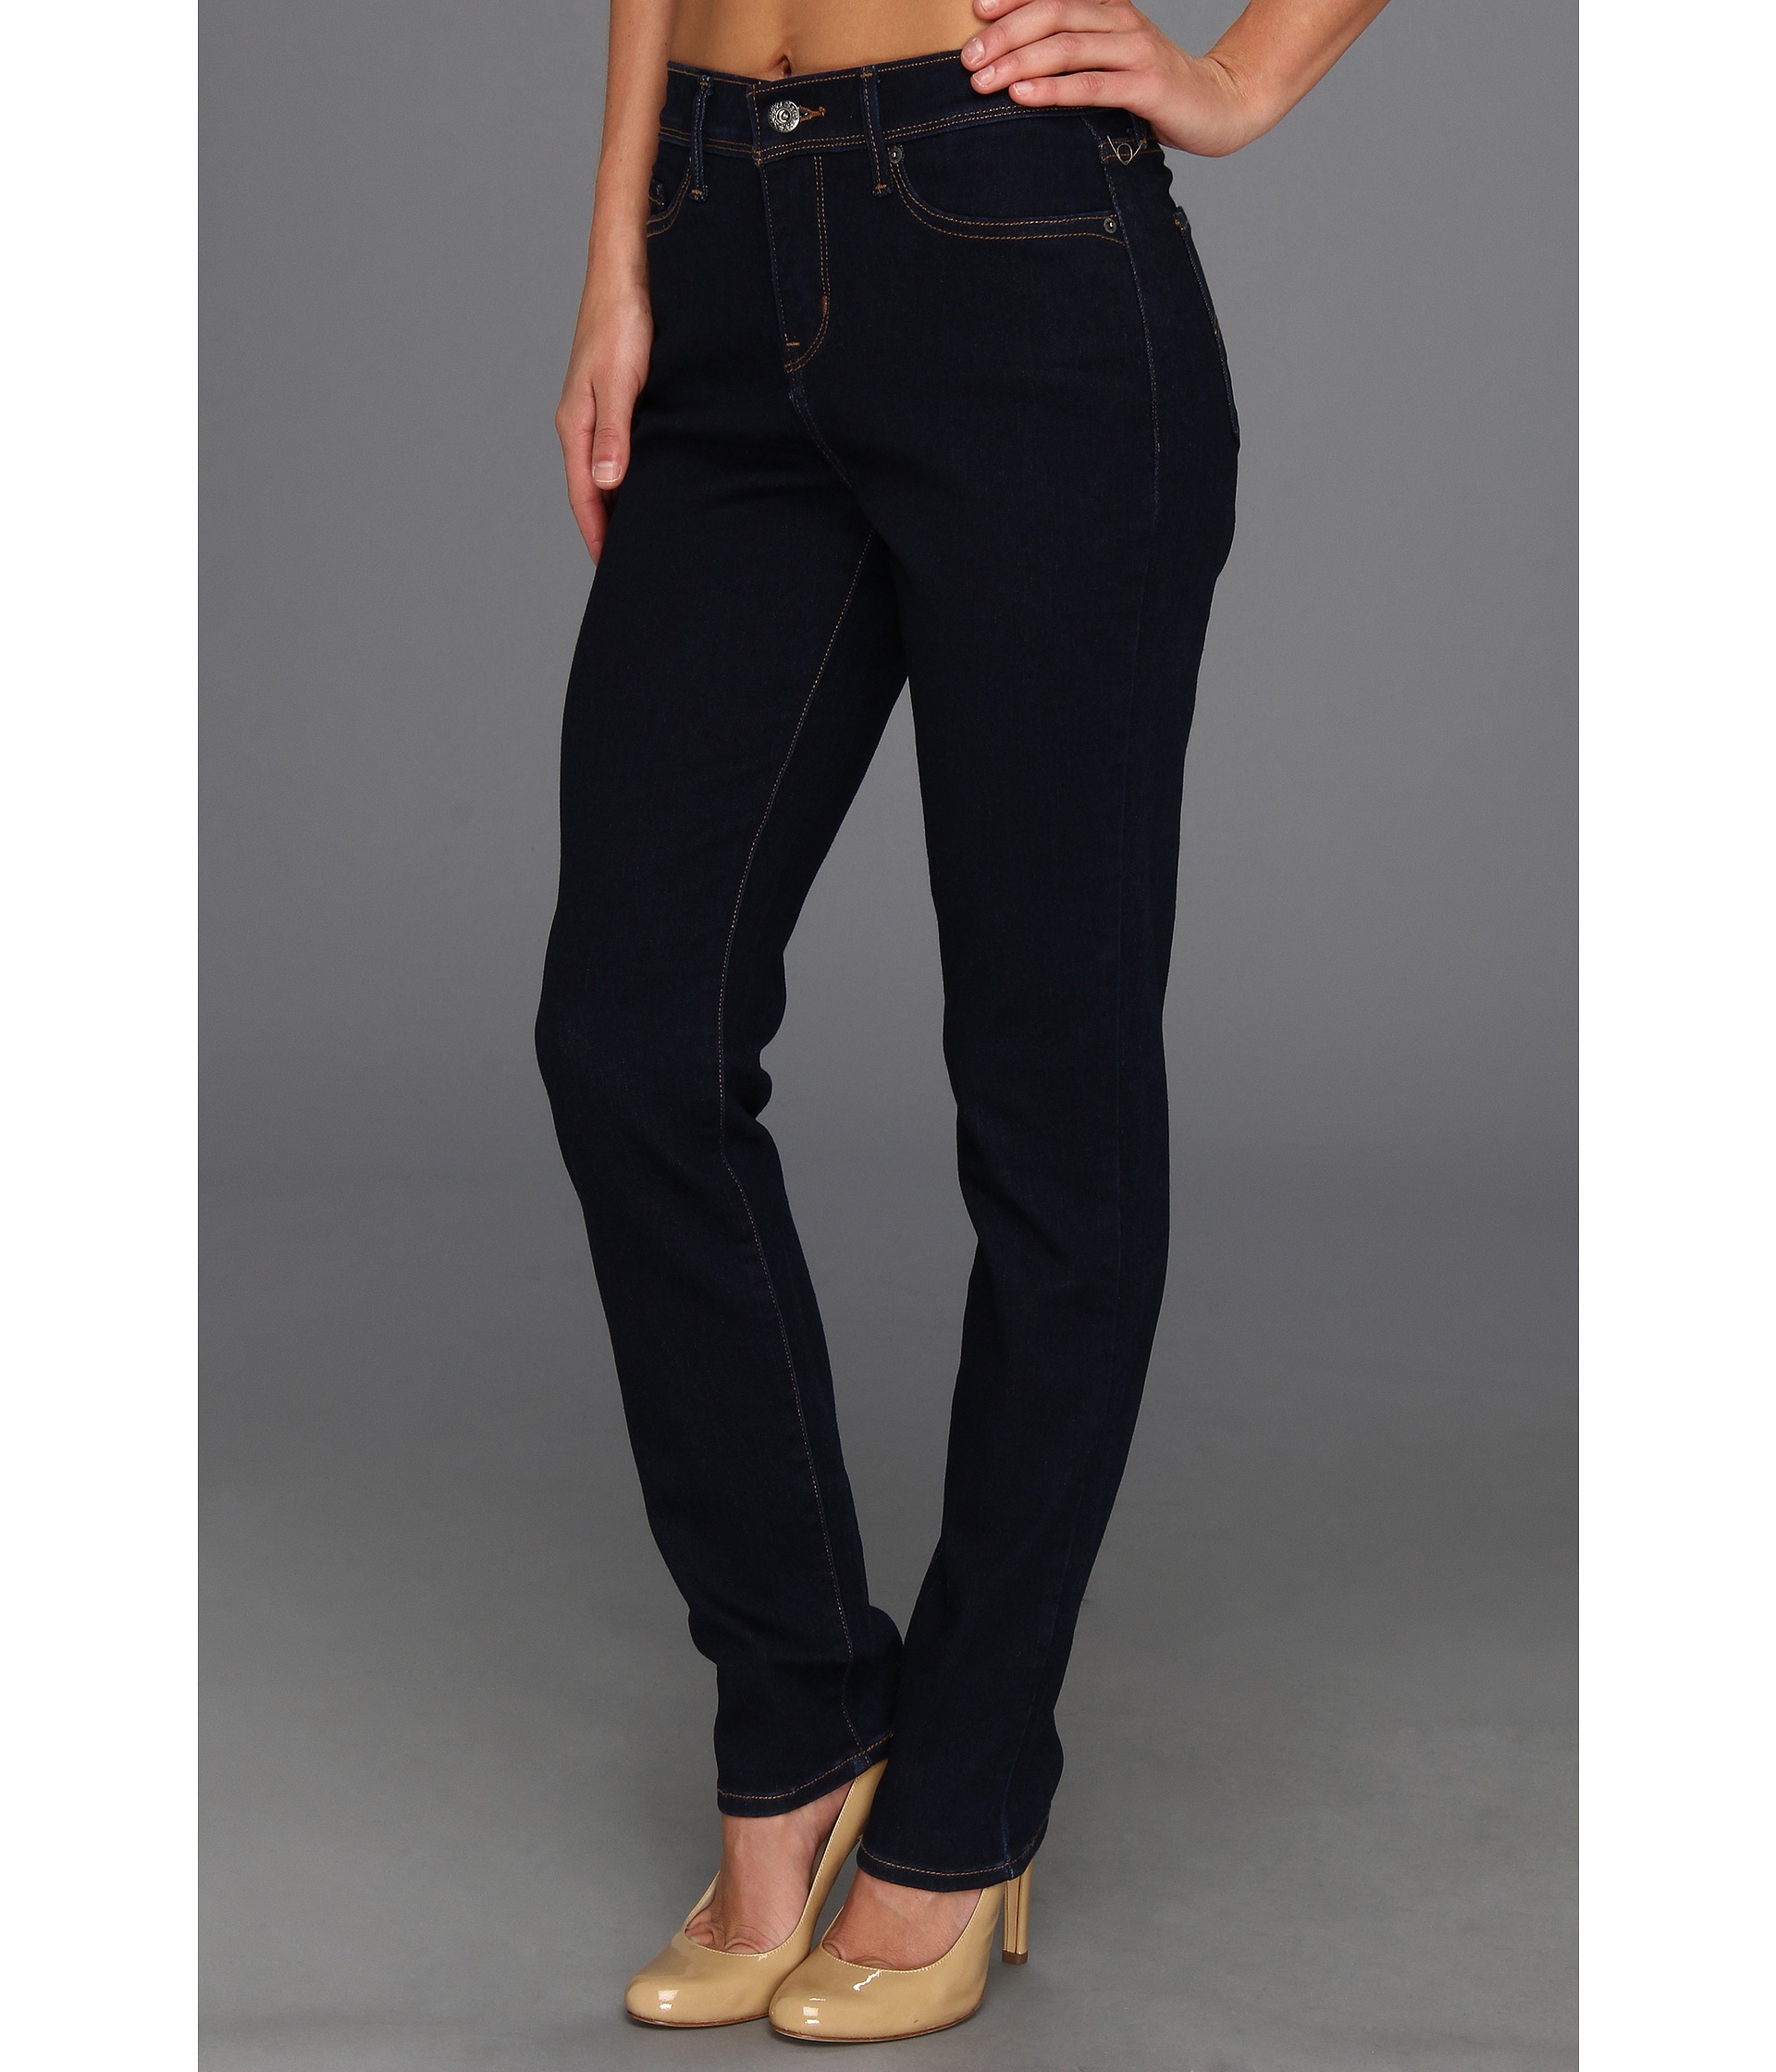 Levi's® Womens 512™ Perfectly Slimming Skinny Jean - Zappos.com Free ...